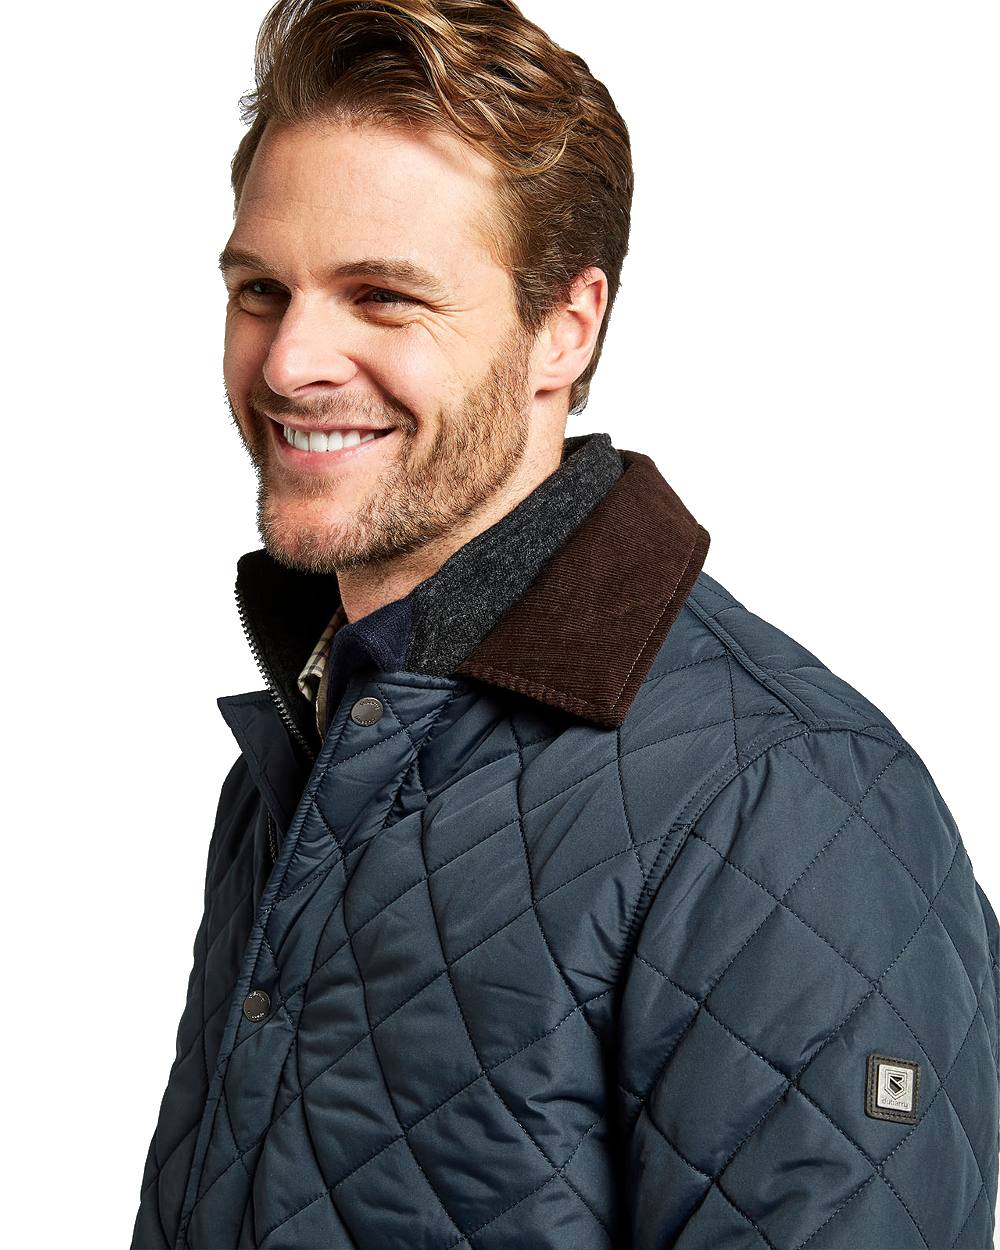 Dubarry Mountusher Quilted Jacket in Navy 